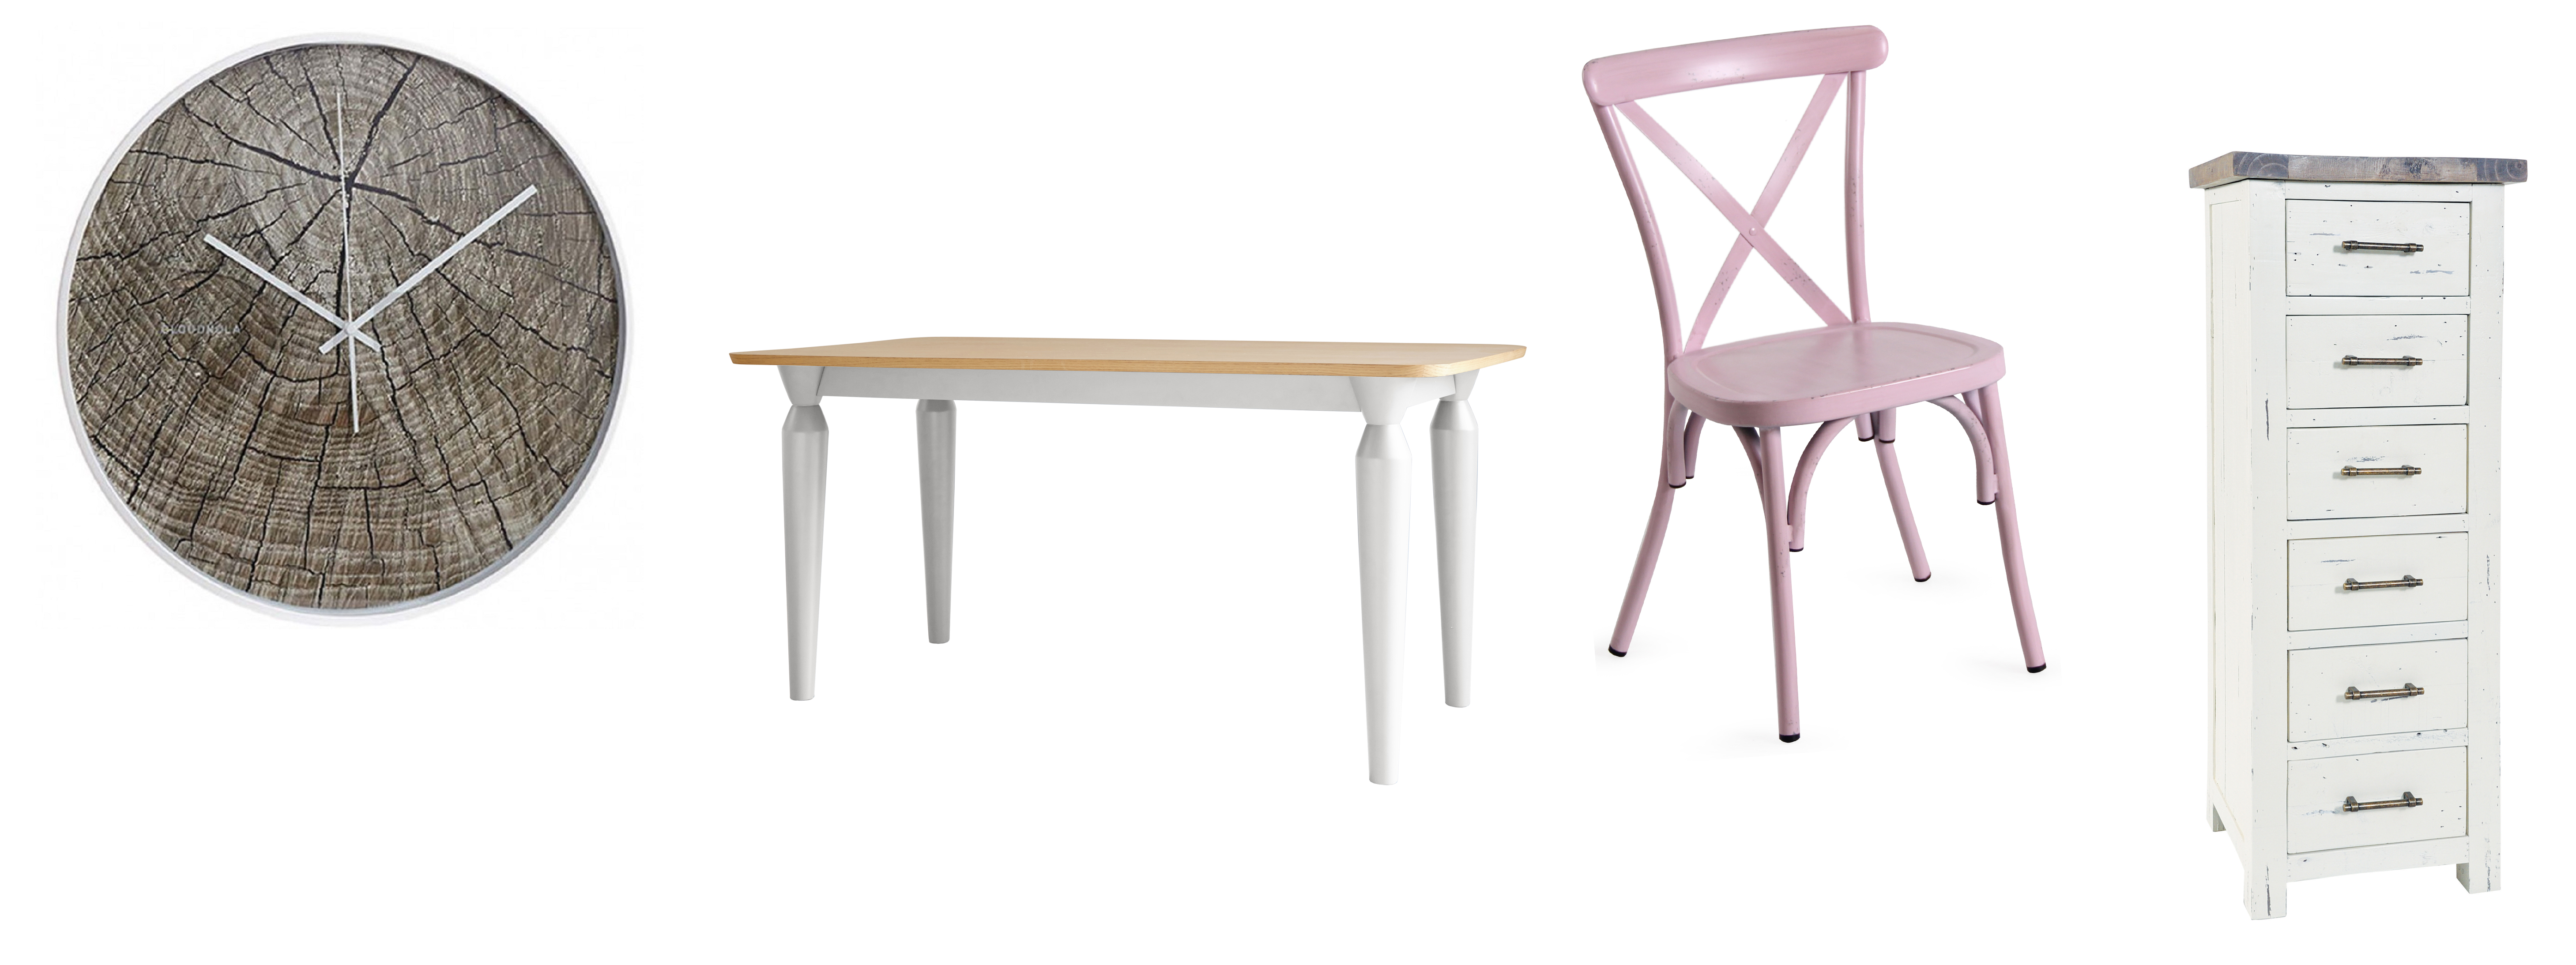 (L-R) Cloudnola Structure Wood Wall Clock, £67.20, Viva Lagoon; Cleo 6-Seater Oak and Matt White Dining Table, currently reduced from £329 to £229, Danetti; Retro Cross Back Dining Chair, Pink, £99.99, Garden Furniture Centre; Dorset Tall Reclaimed Wood Chest of Drawers, £395, Modish Living (Viva Lagoon/Danetti/Garden Furniture Centre/ Modish Living/PA)